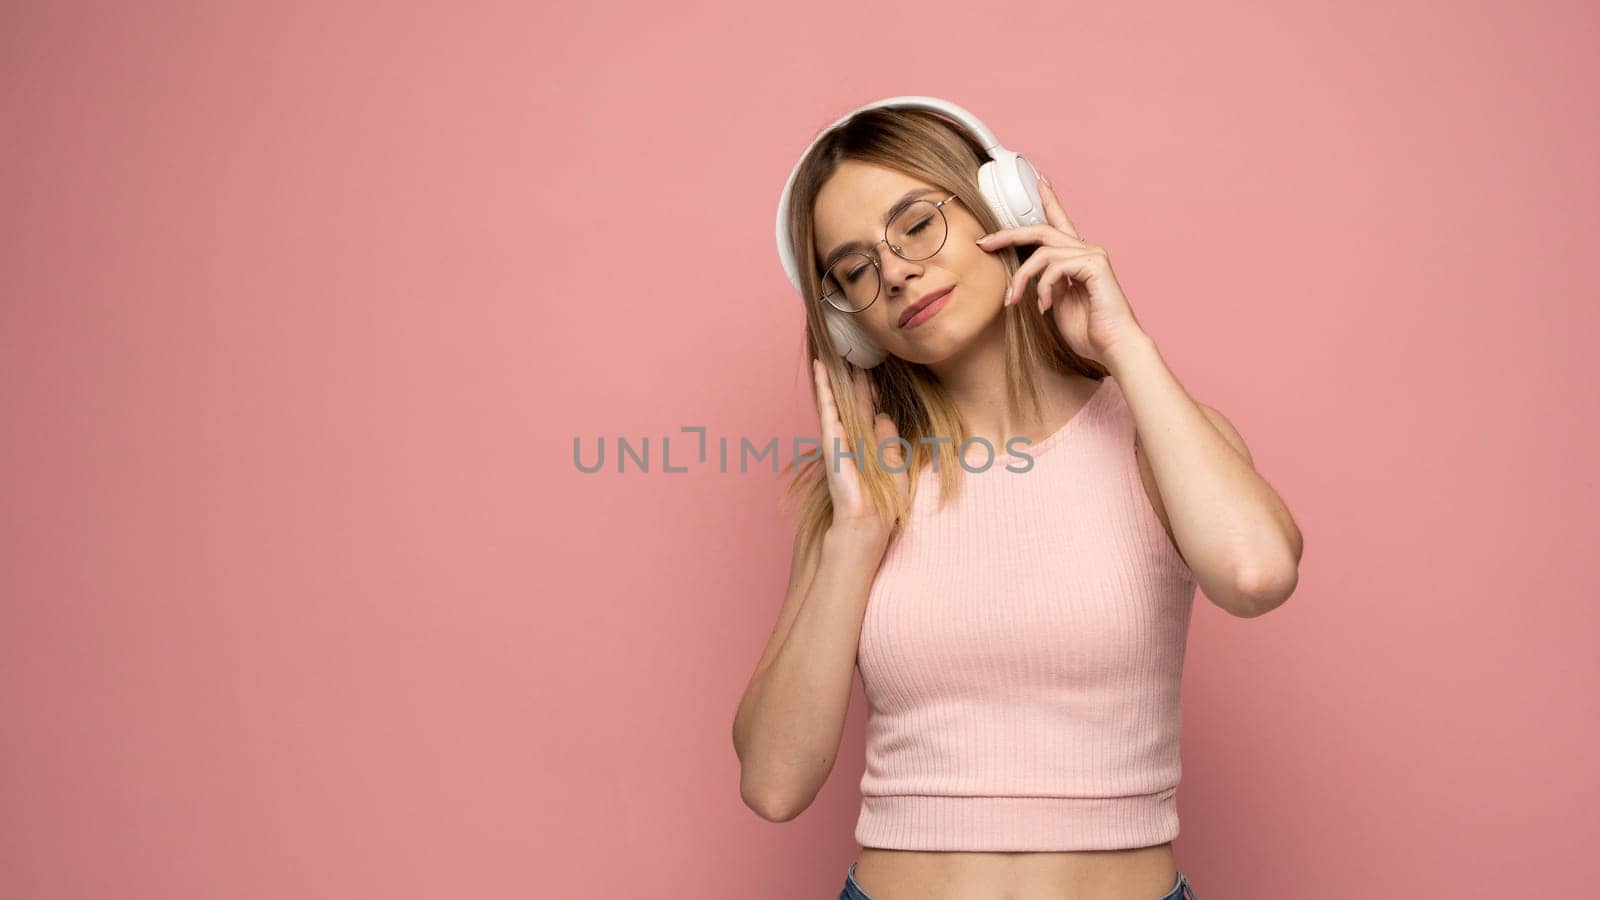 Lifestyle Concept. Portrait of beautiful woman in a glasses and pink shirt joyful listening to music. Pink studio background. Copy Space